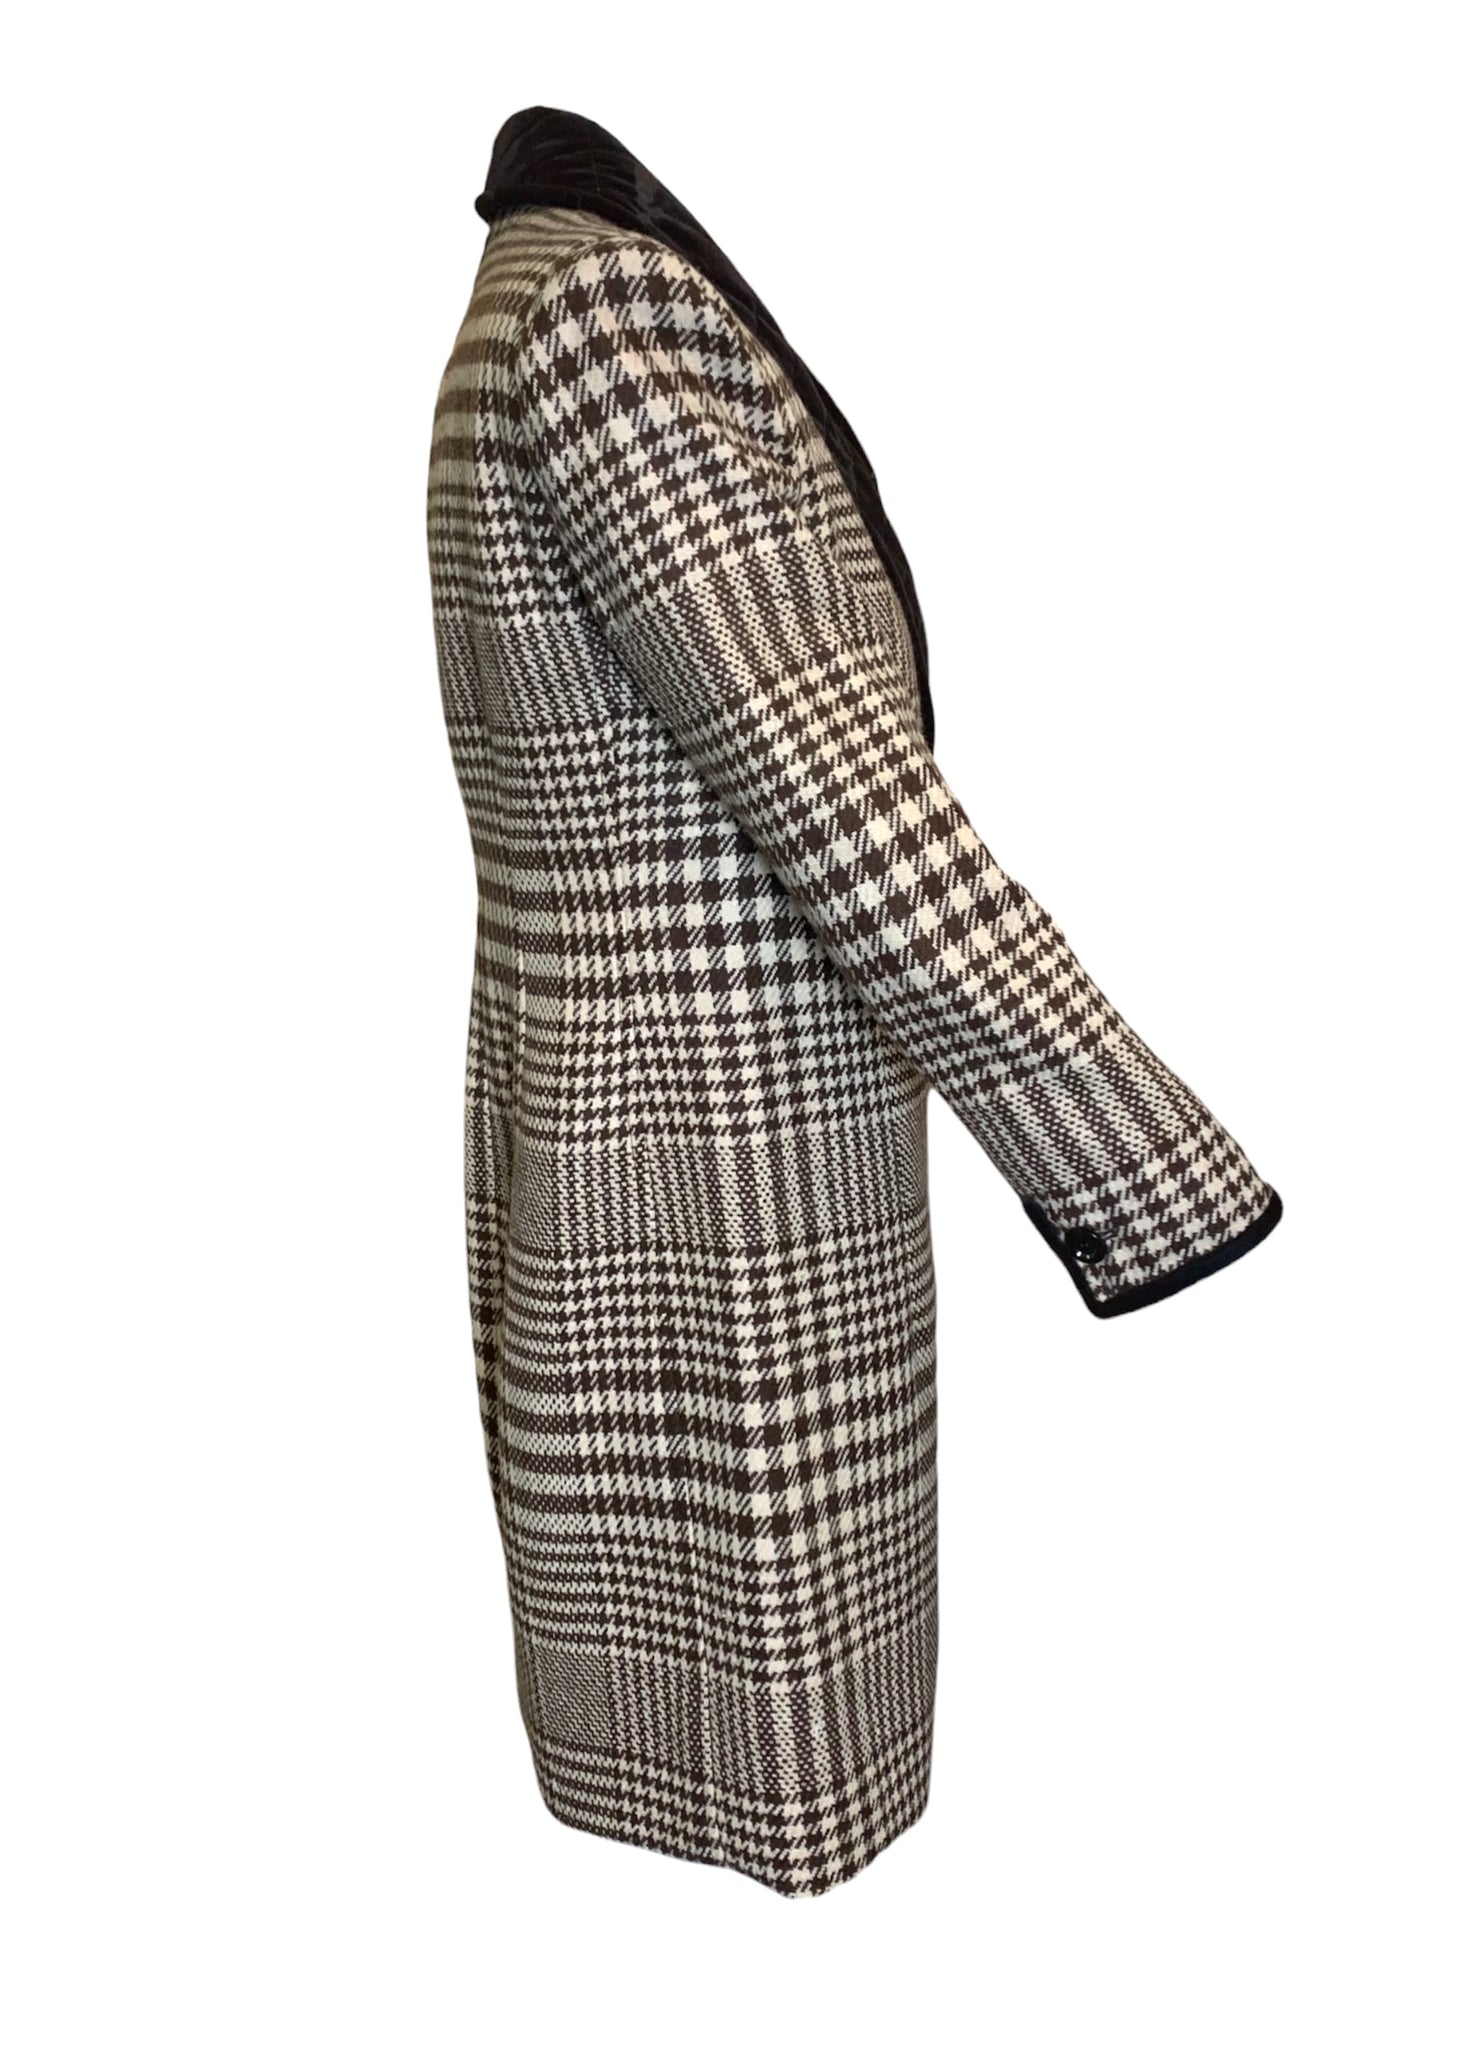   Valentino Brown and Ivory Houndstooth Wool Dress Coat with Velvet Trim SIDE 2 of 6